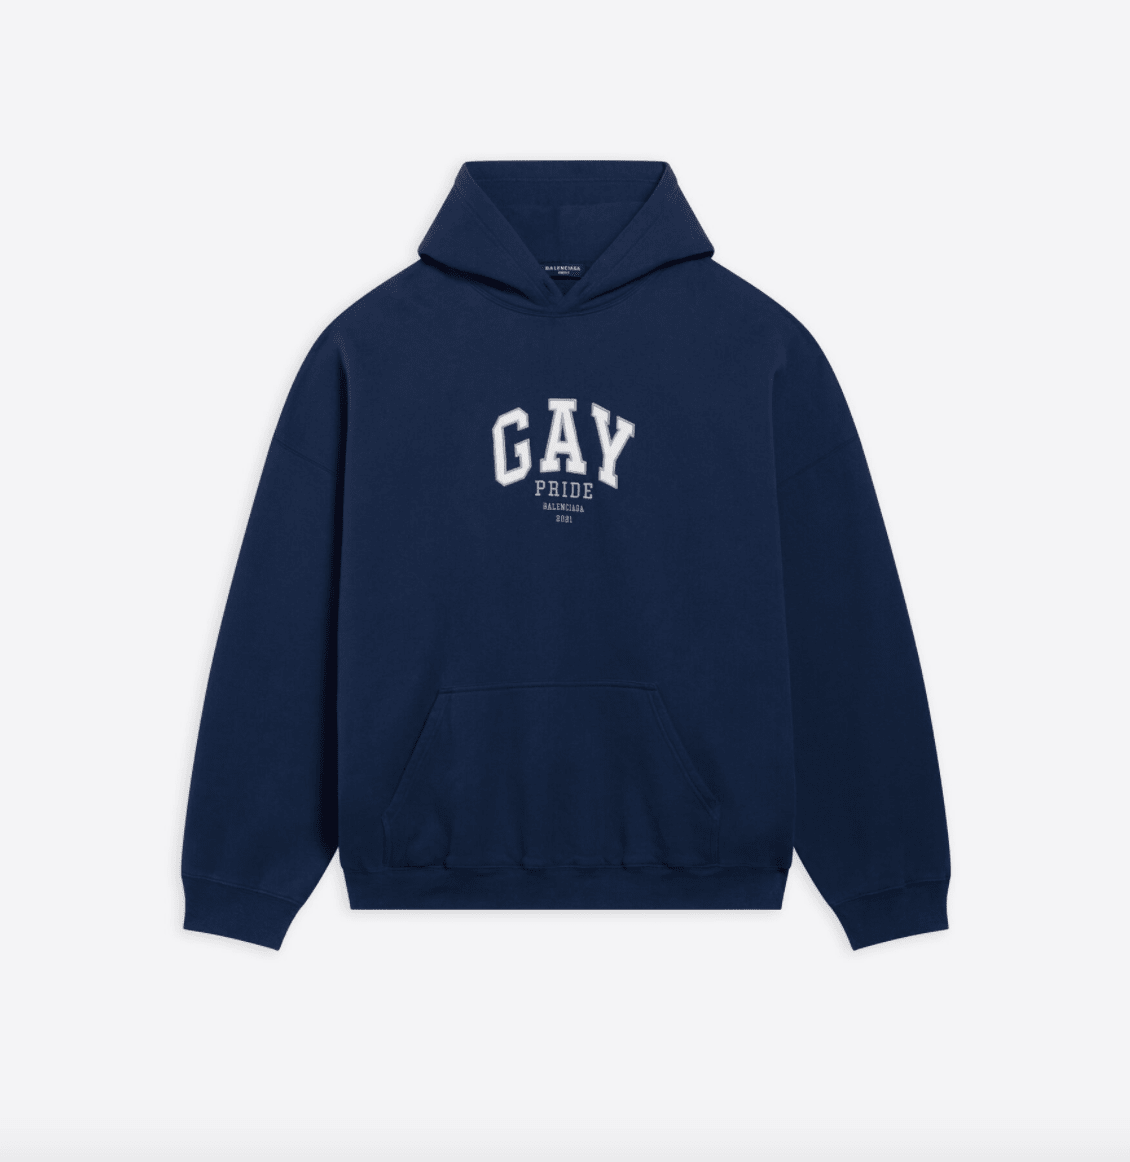 what key words do gay pride clothing people use